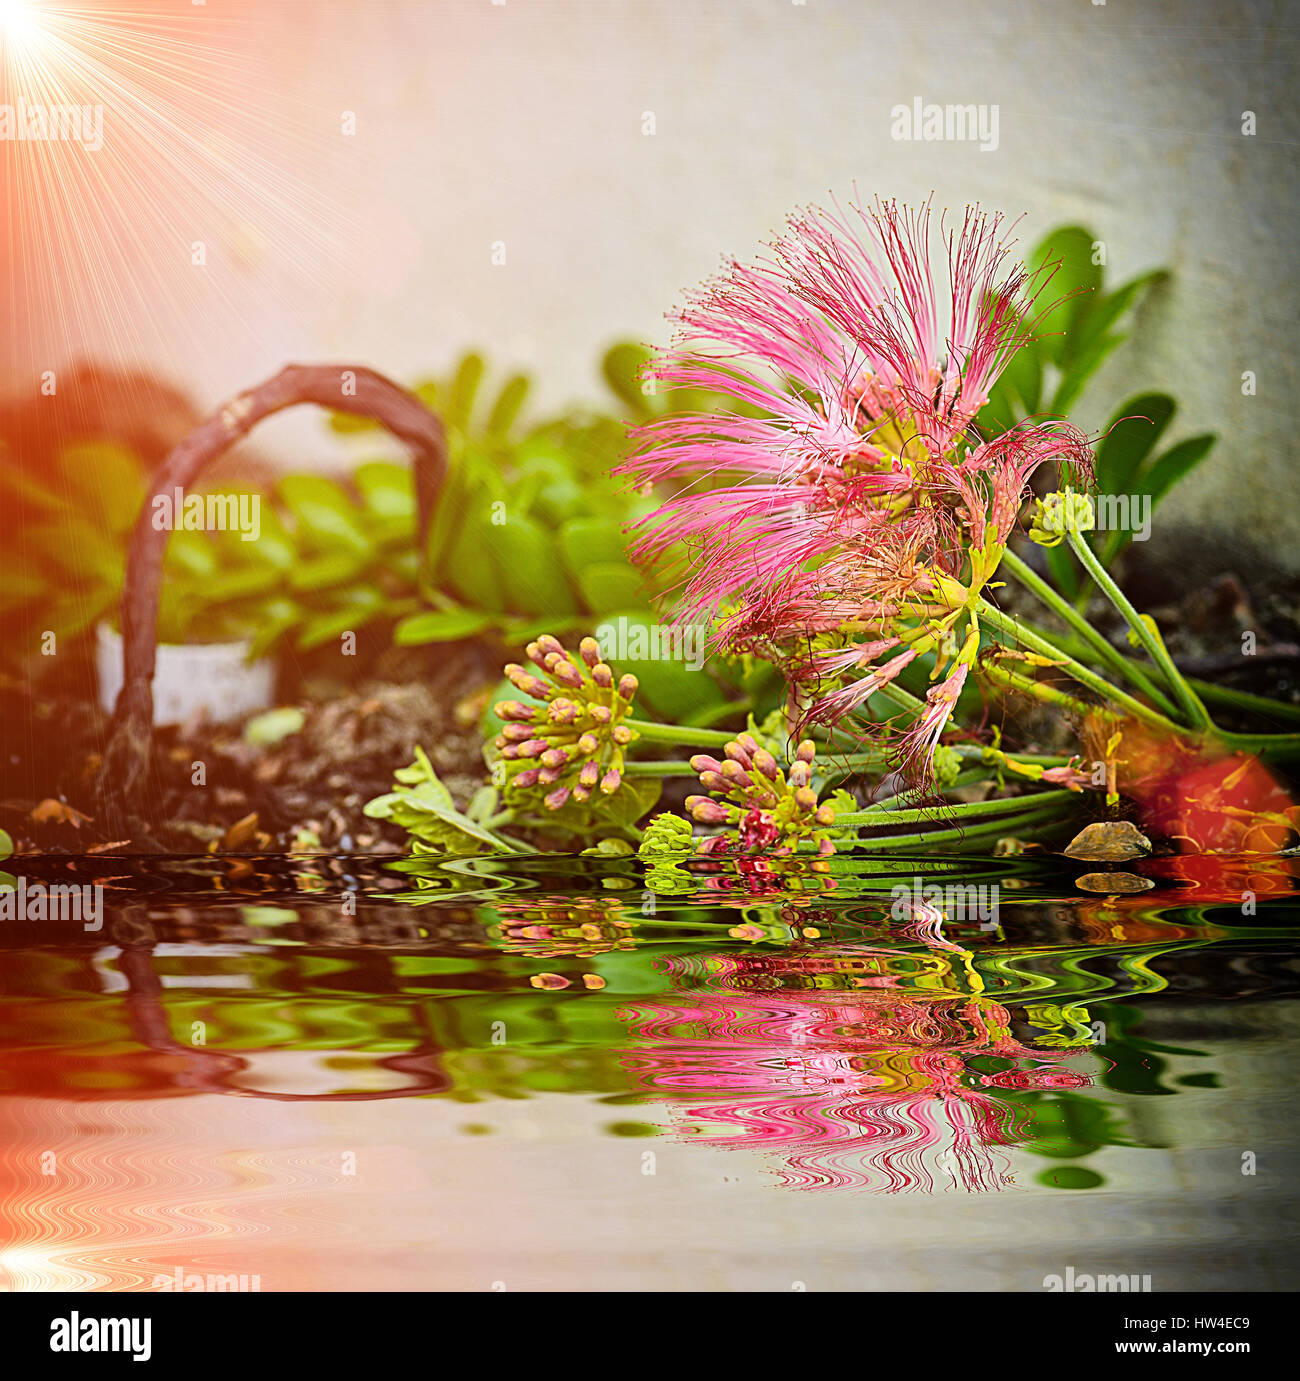 Abstract soft blurred and soft focus of Albizia julibrissin with reflect in water Stock Photo